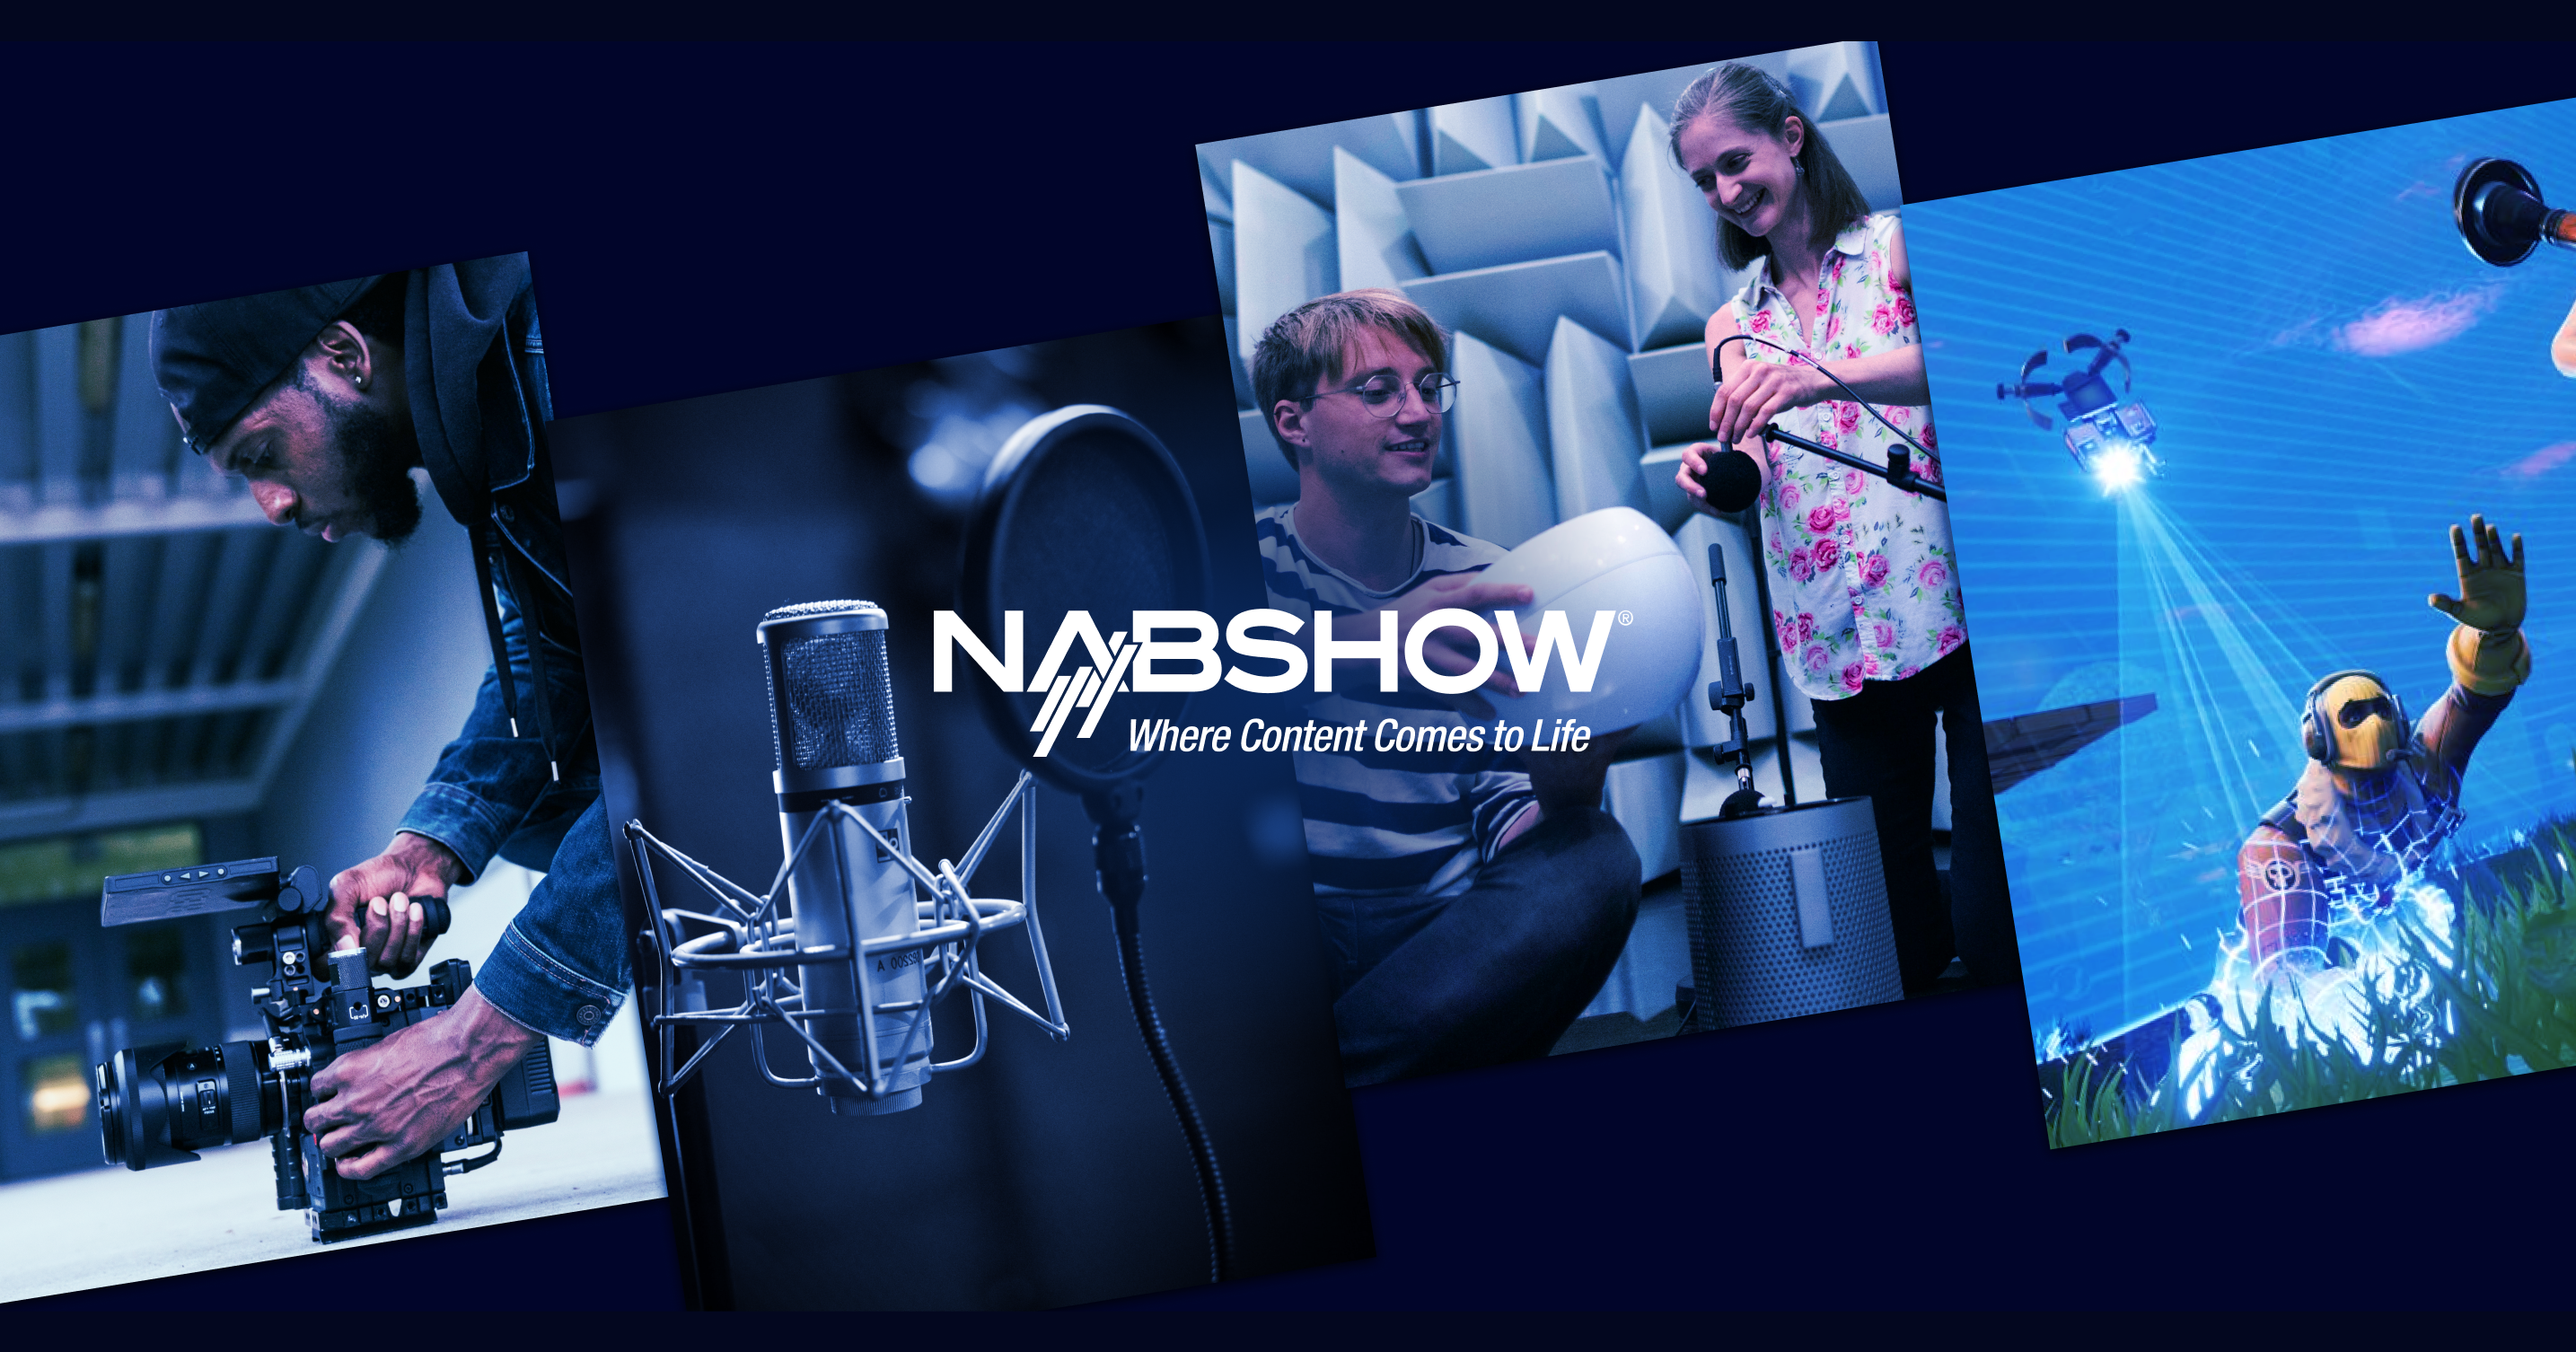 Nab 2022 Schedule 2022 Nab Show Conference Registration Is Now Open - Nab Amplify